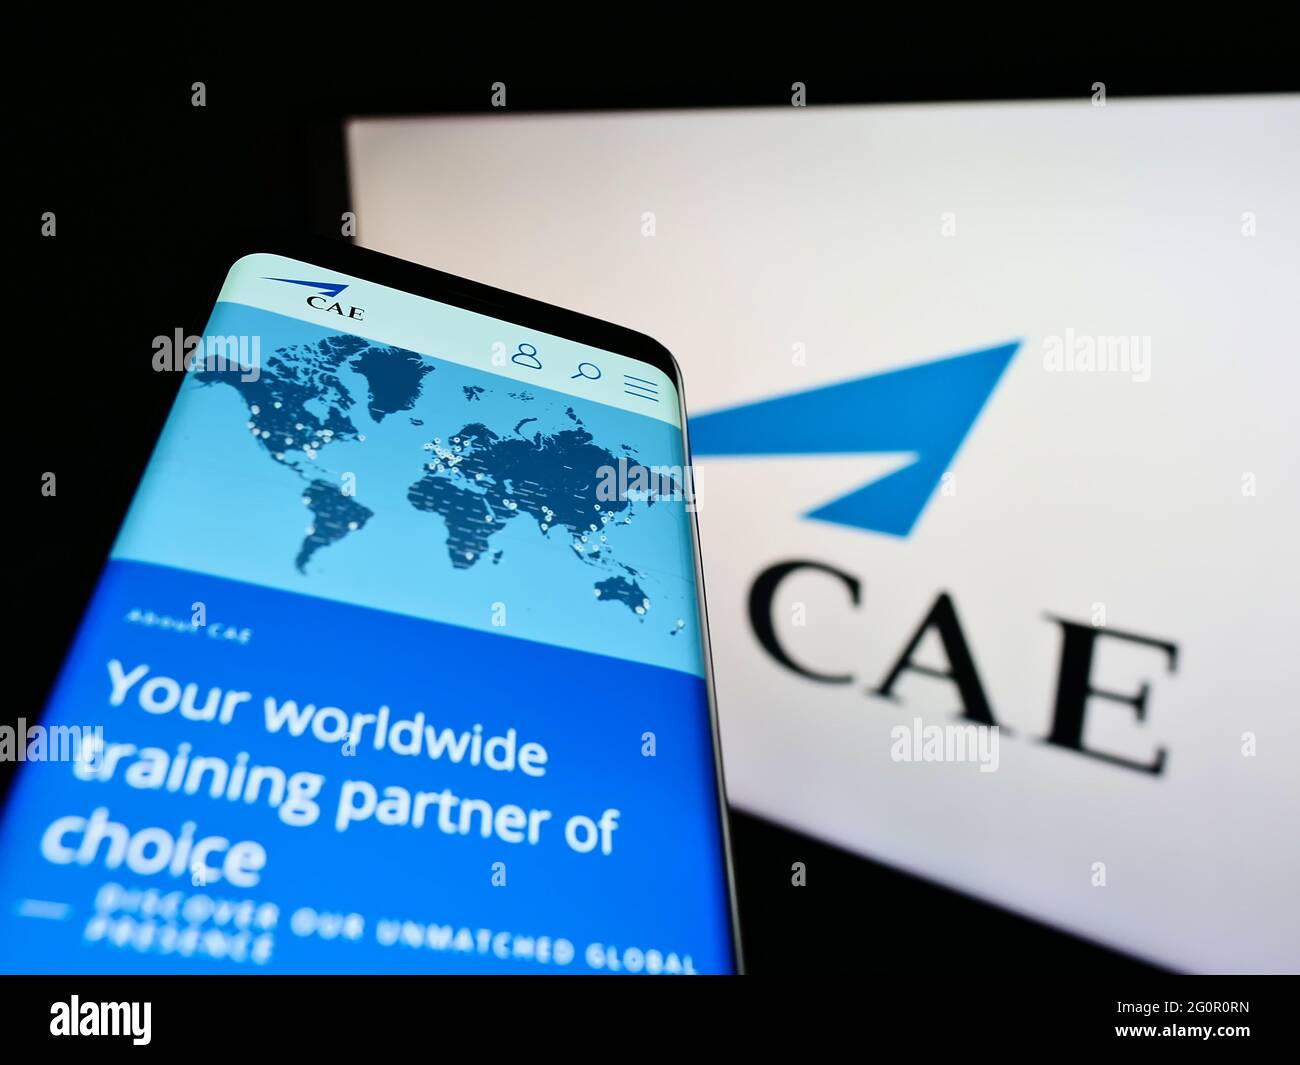 Person holding smartphone with website of Canadian aerospace company CAE Inc. on screen in front of logo. Focus on top-left of phone display. Stock Photo